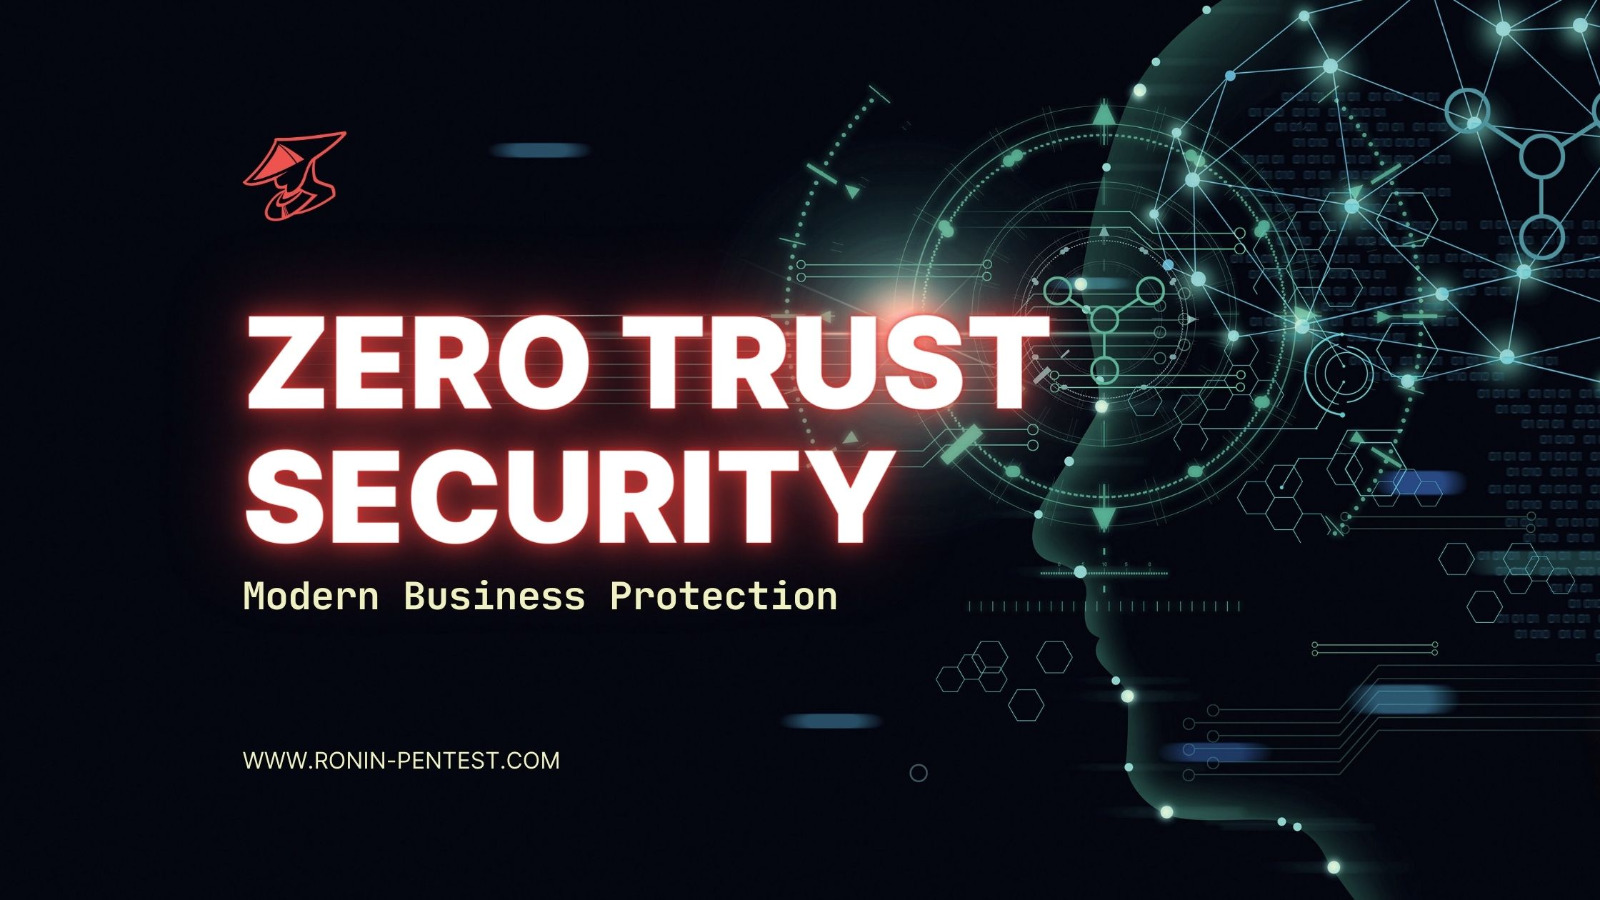 Ronin-Pentest | Zero Trust Security: The Key to Modern Business Protection